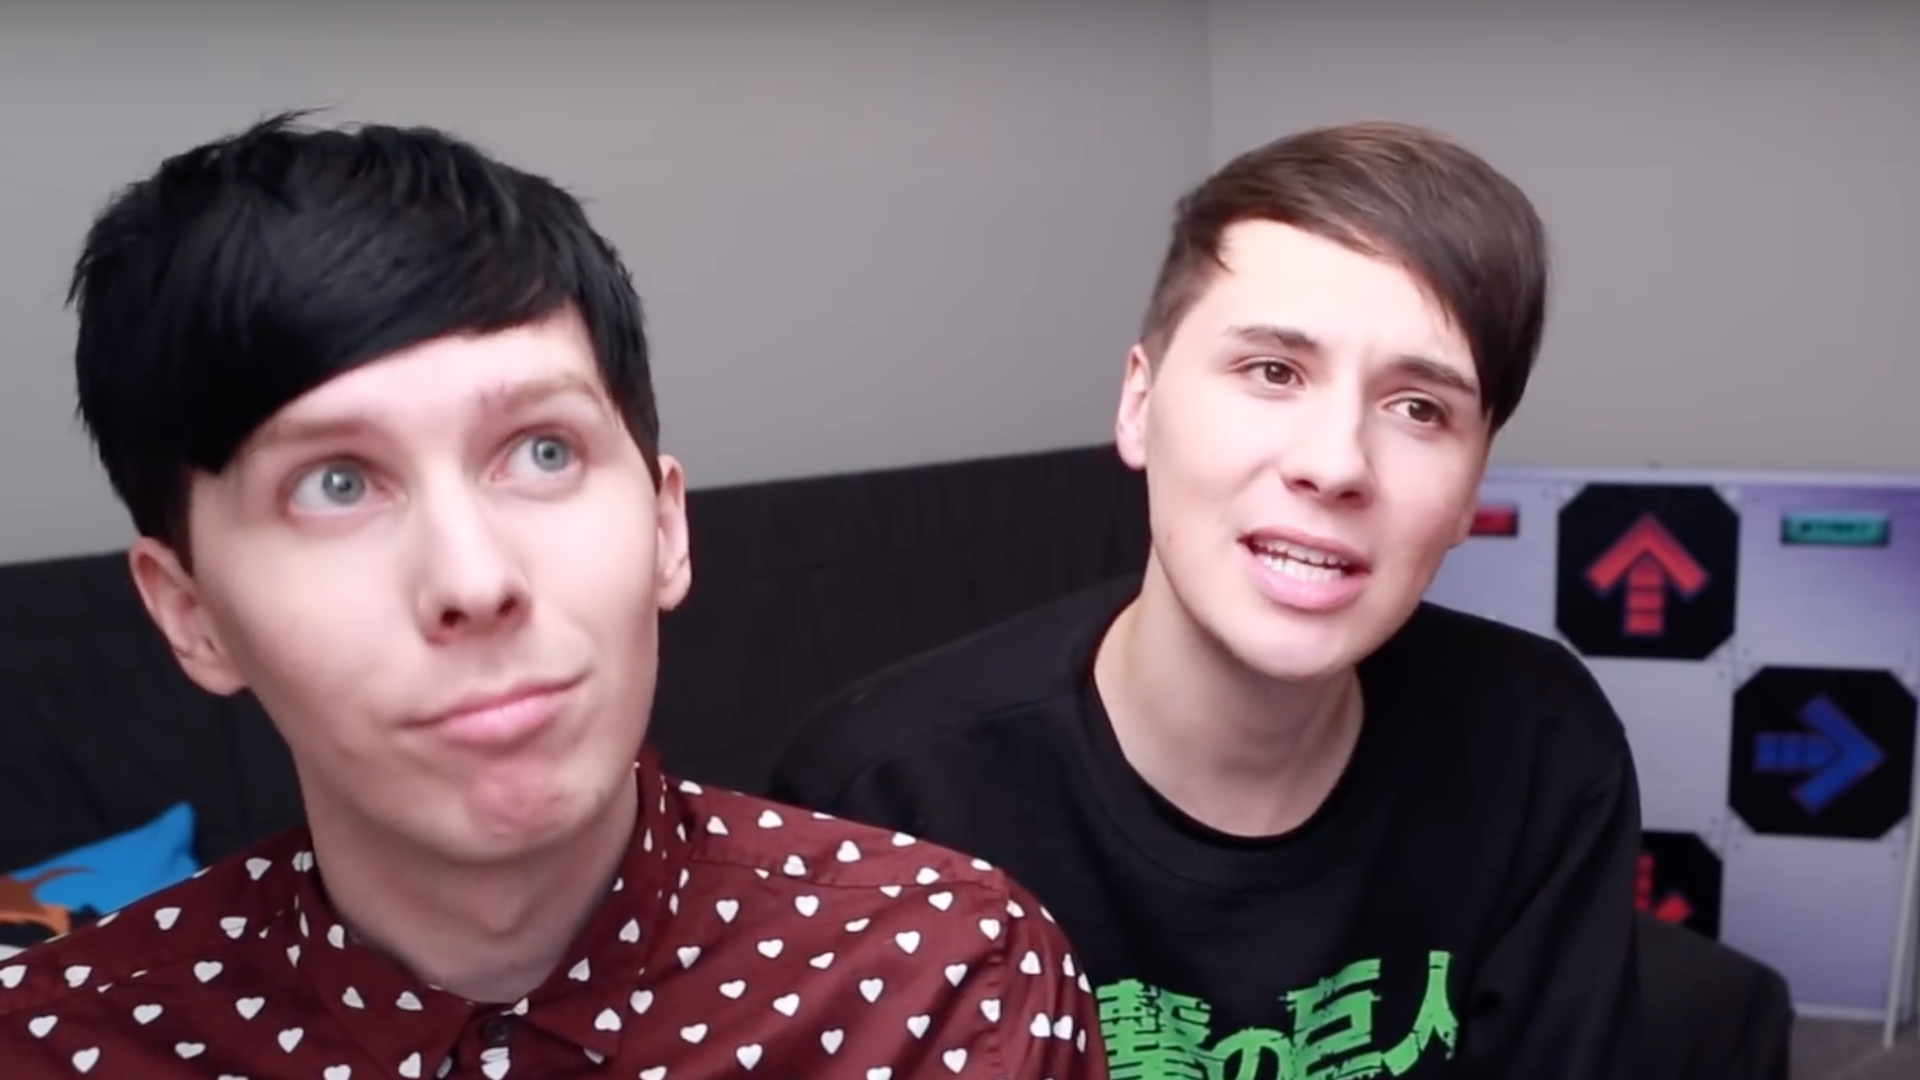 Dan and Phil play a game on Dan's YouTube channel